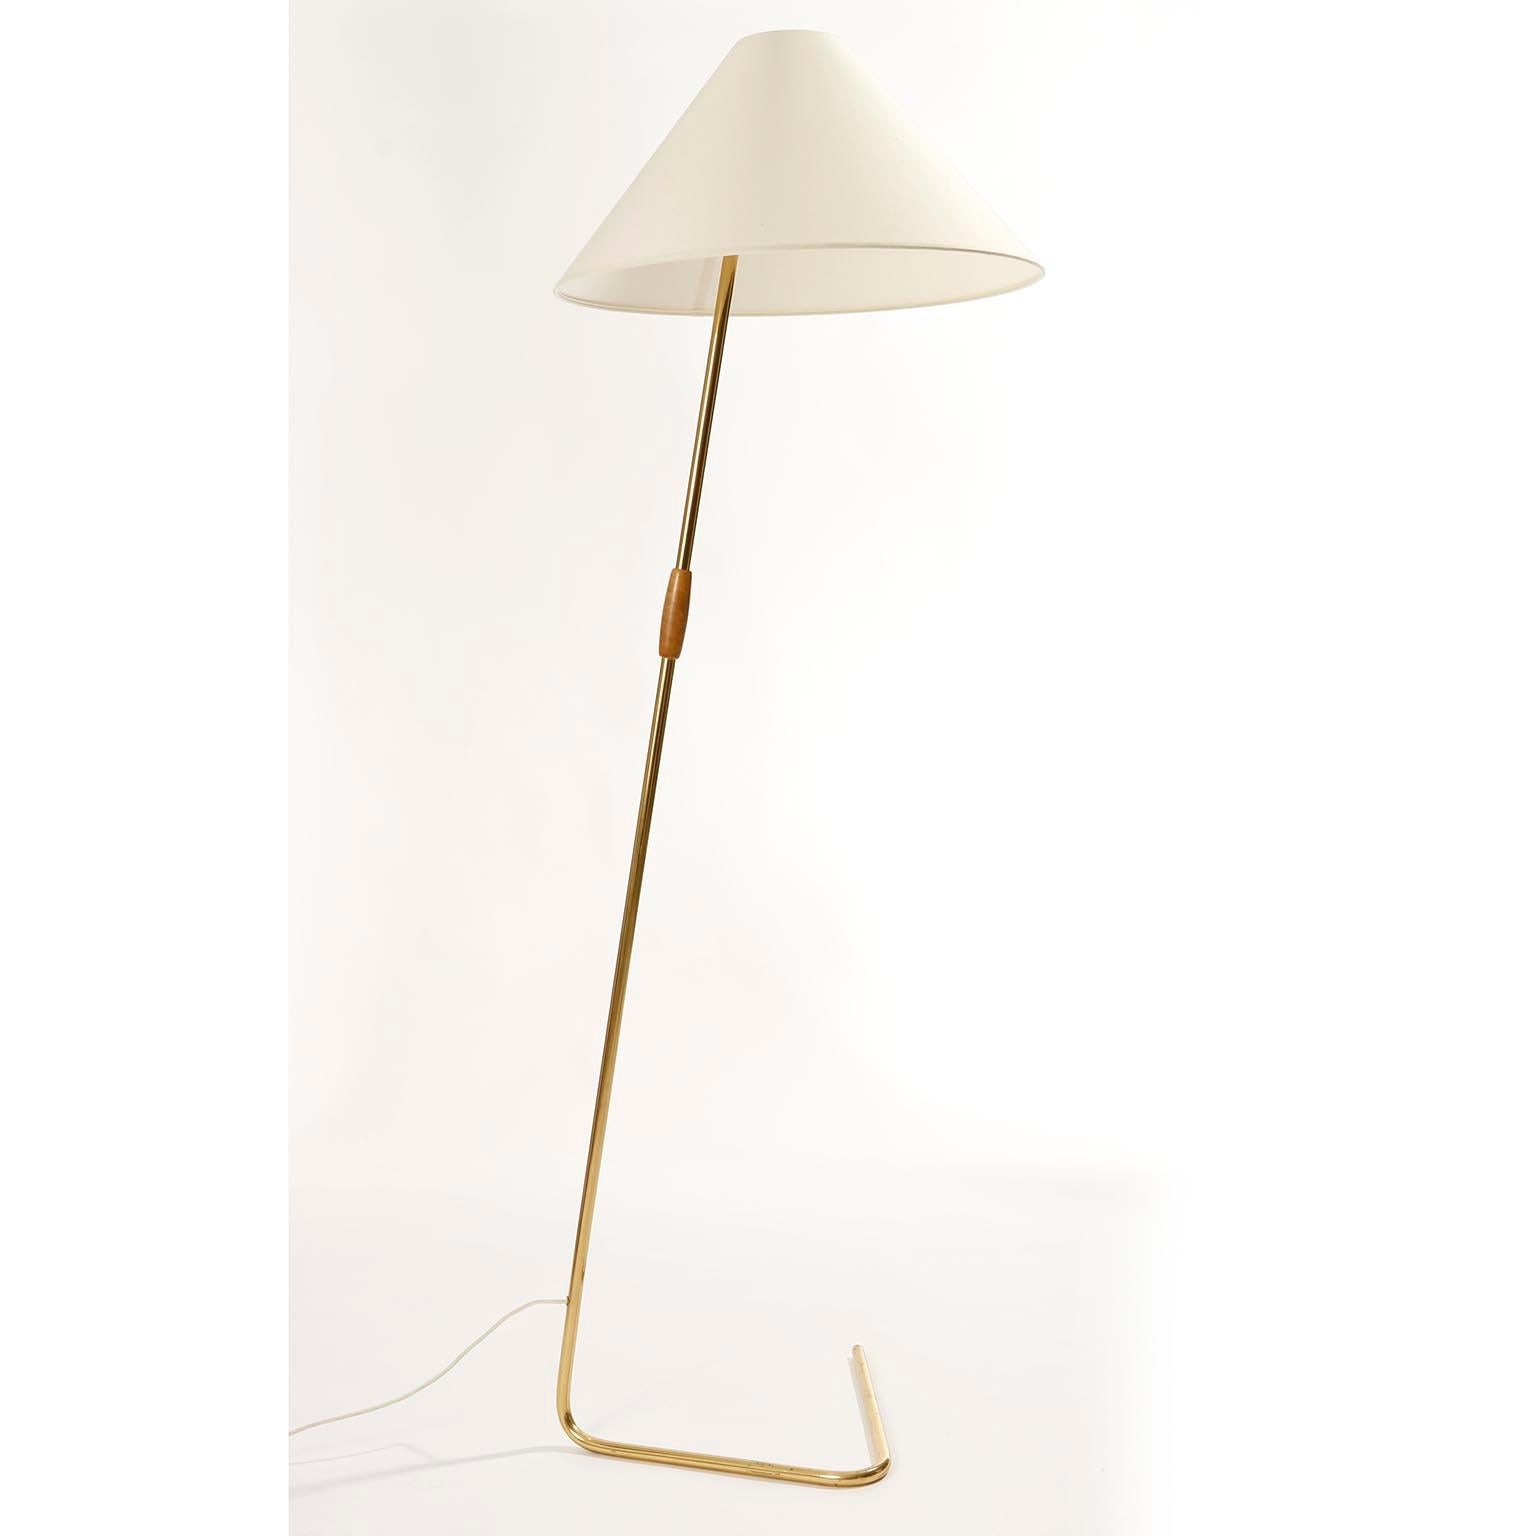 A beautiful brass floor lamp model 'Flamingo' no. 2083 by J.T. Kalmar, manufactured in midcentury, in 1950s or 1960s. The lights is documented in the Kalmar catalogues 1960.
The brass parts are in original condition with a warm aged brass tone and